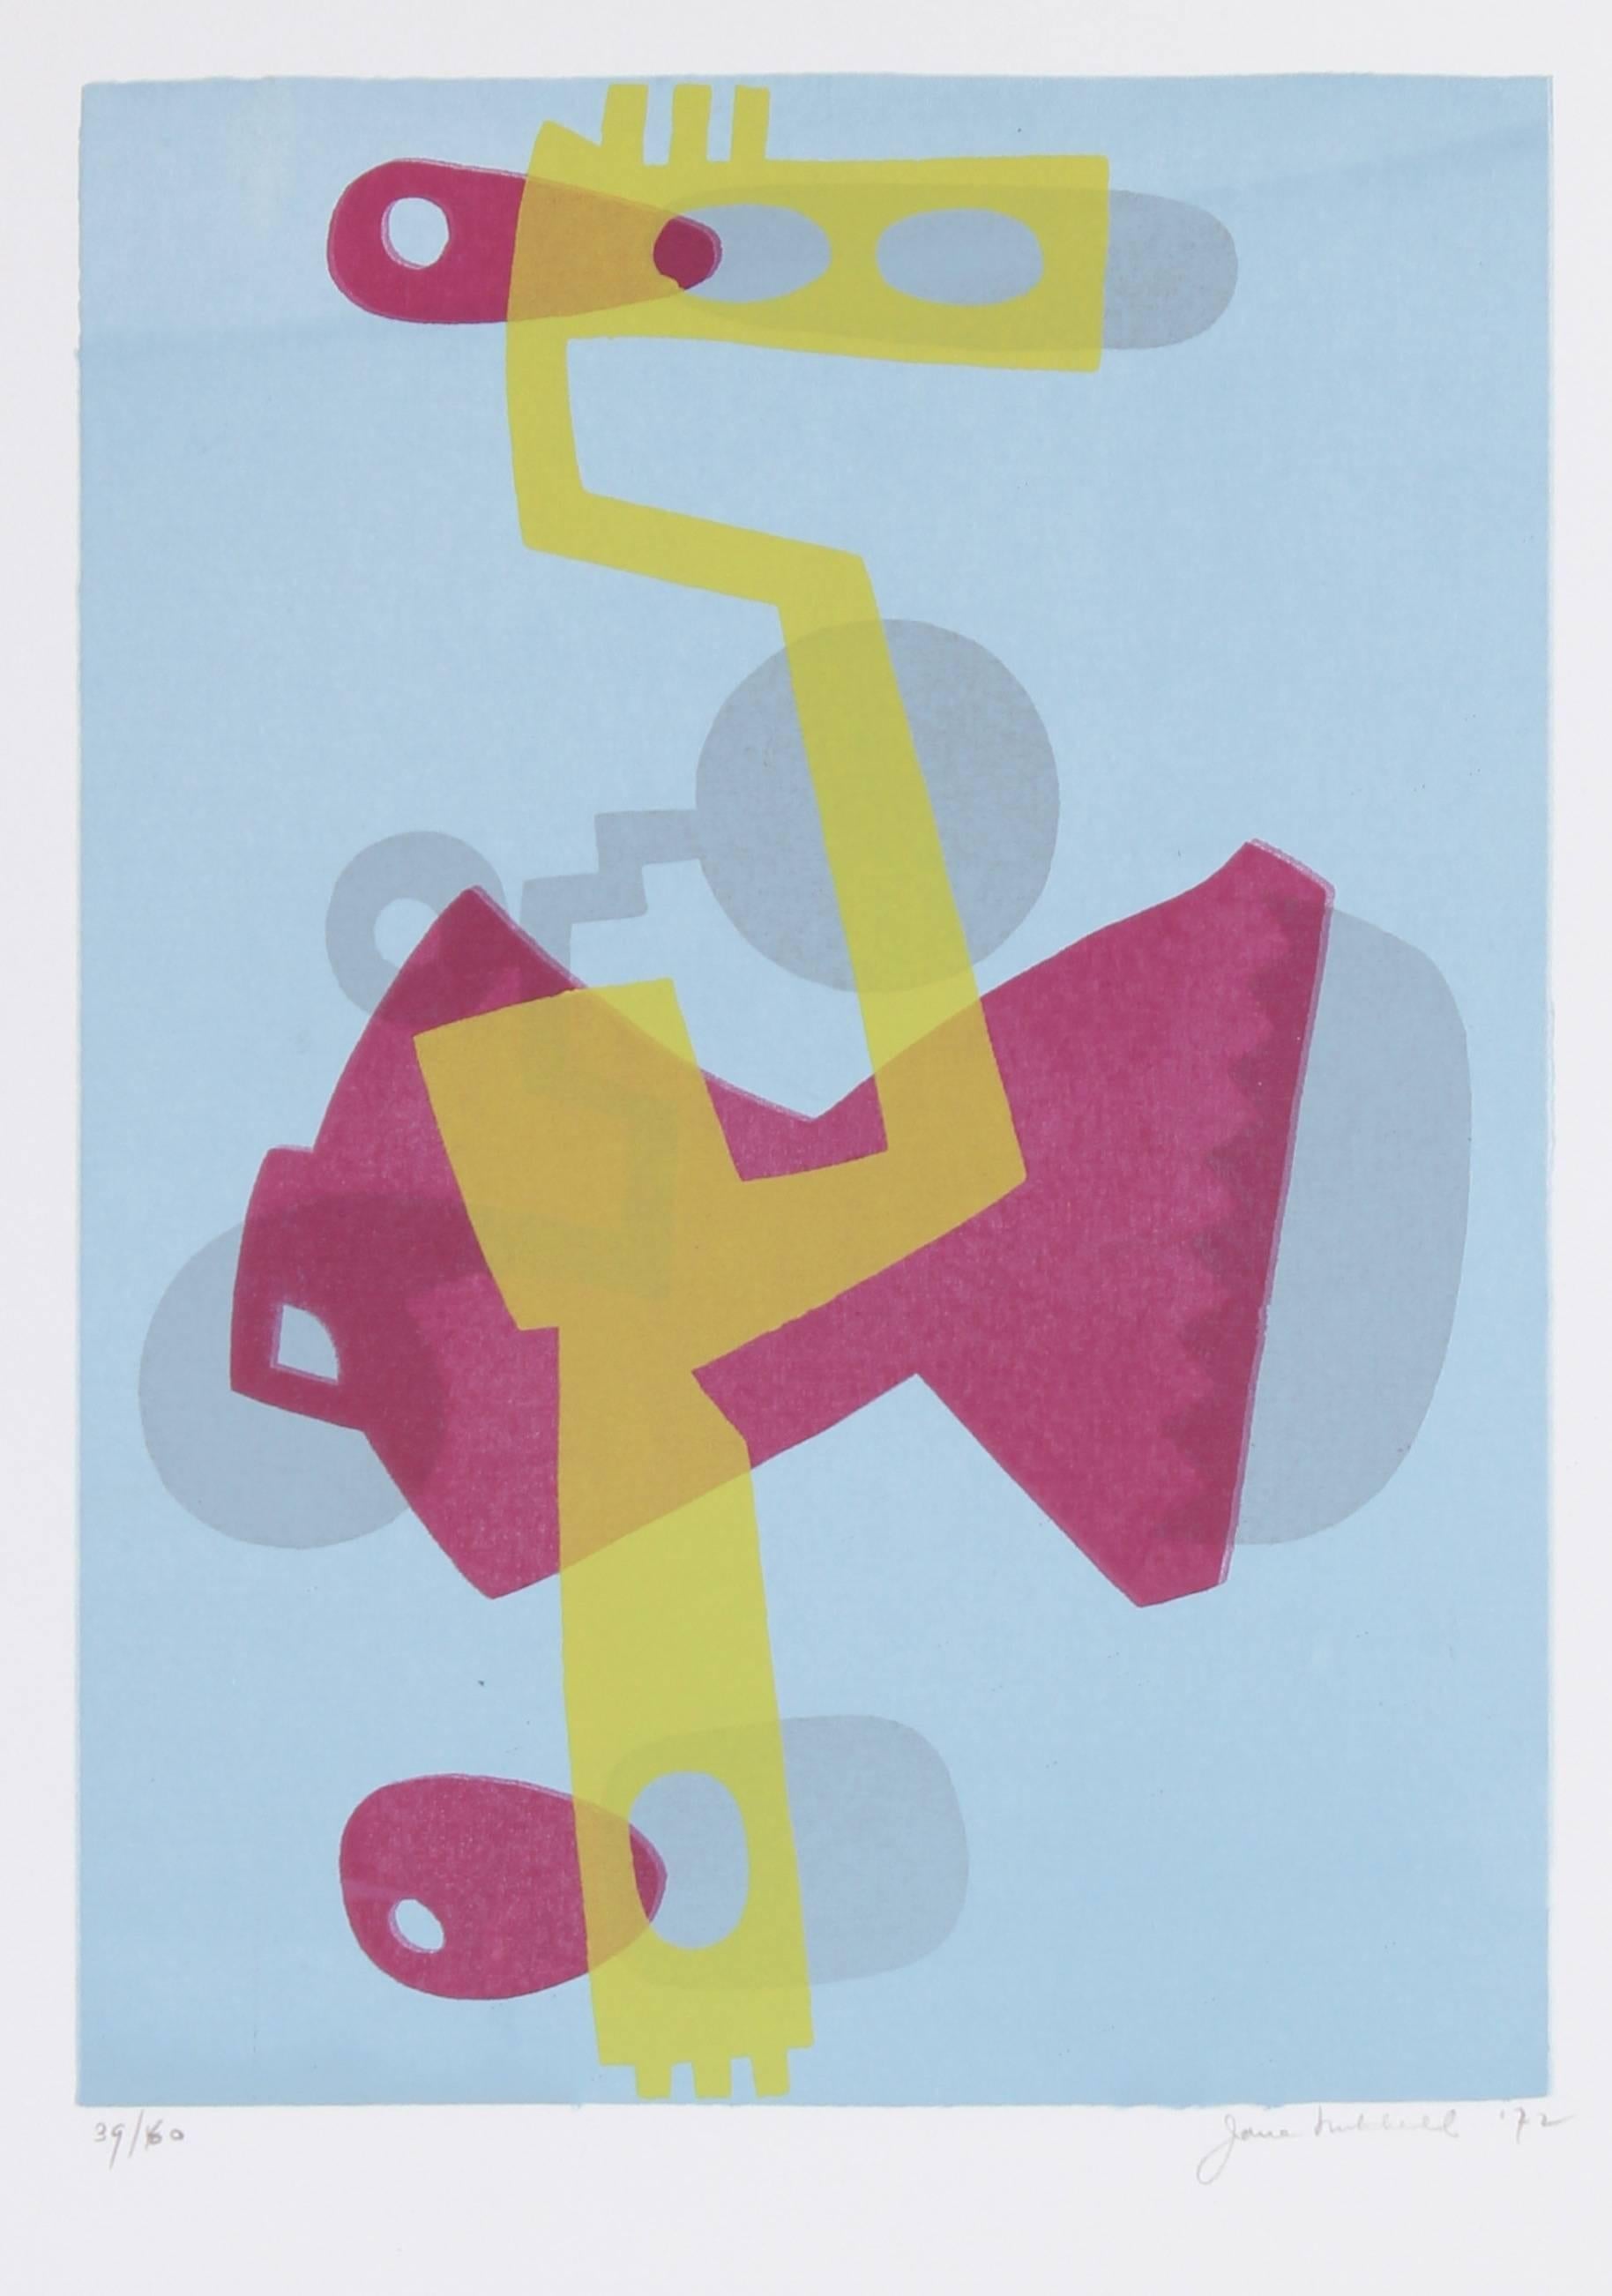 Jane Mitchell Abstract Print - Abstracted Figure in Blue, Yellow, and Pink, Serigraph on Paper, 1972